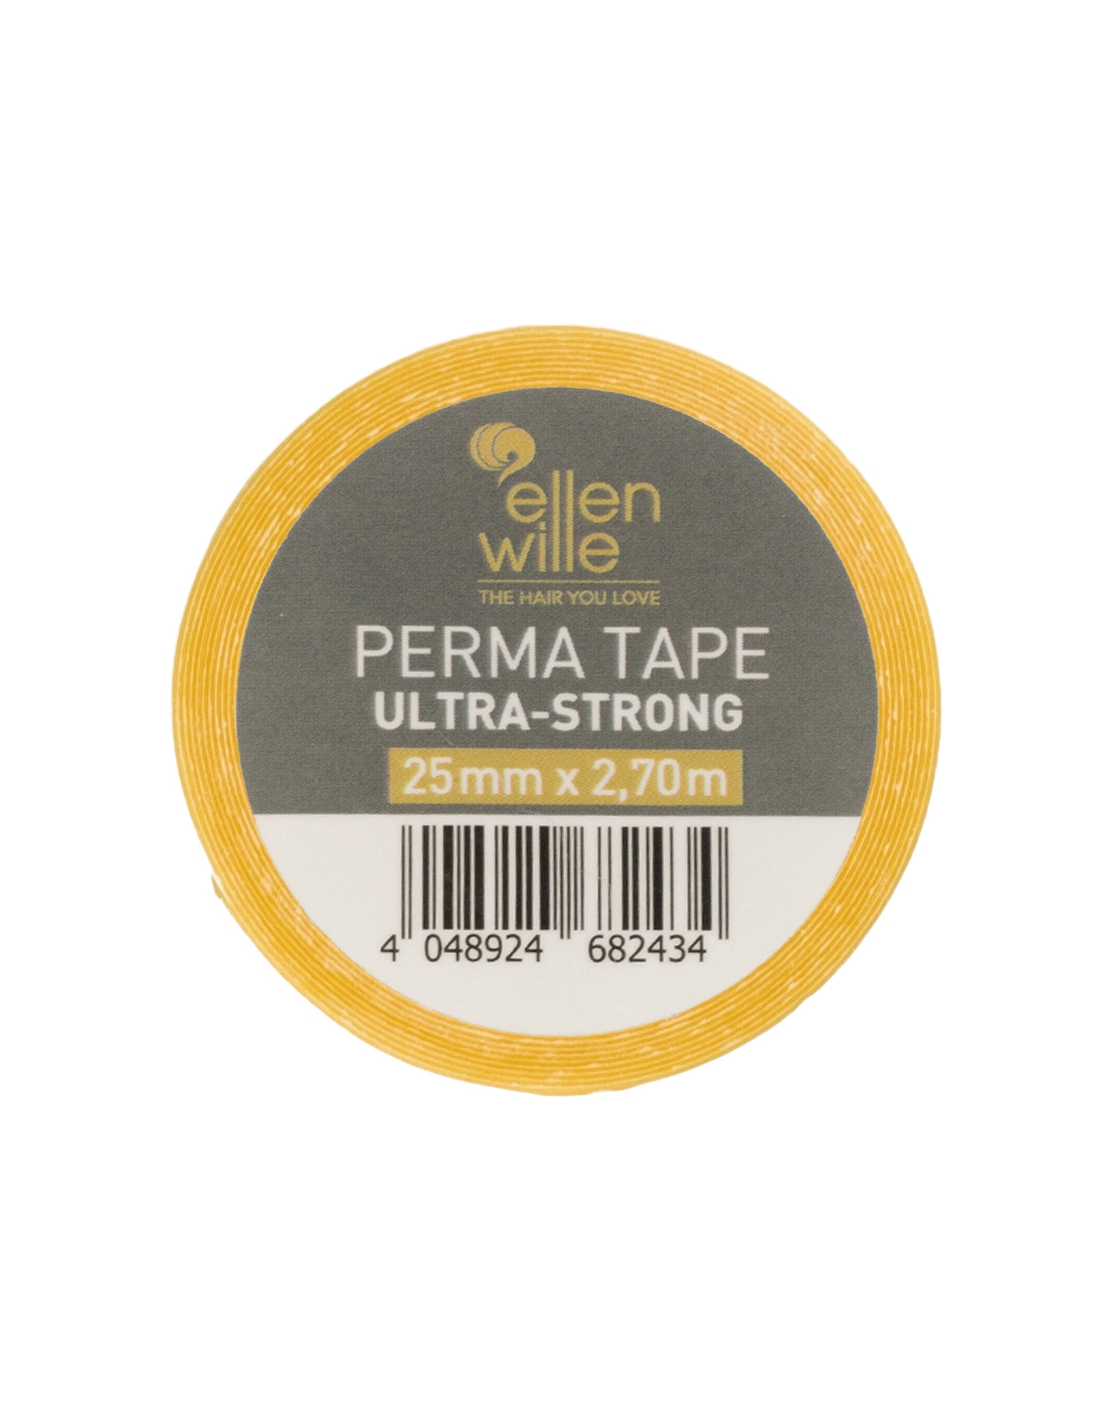 Perma Tape Ultra Strong 25mm x 2,70m